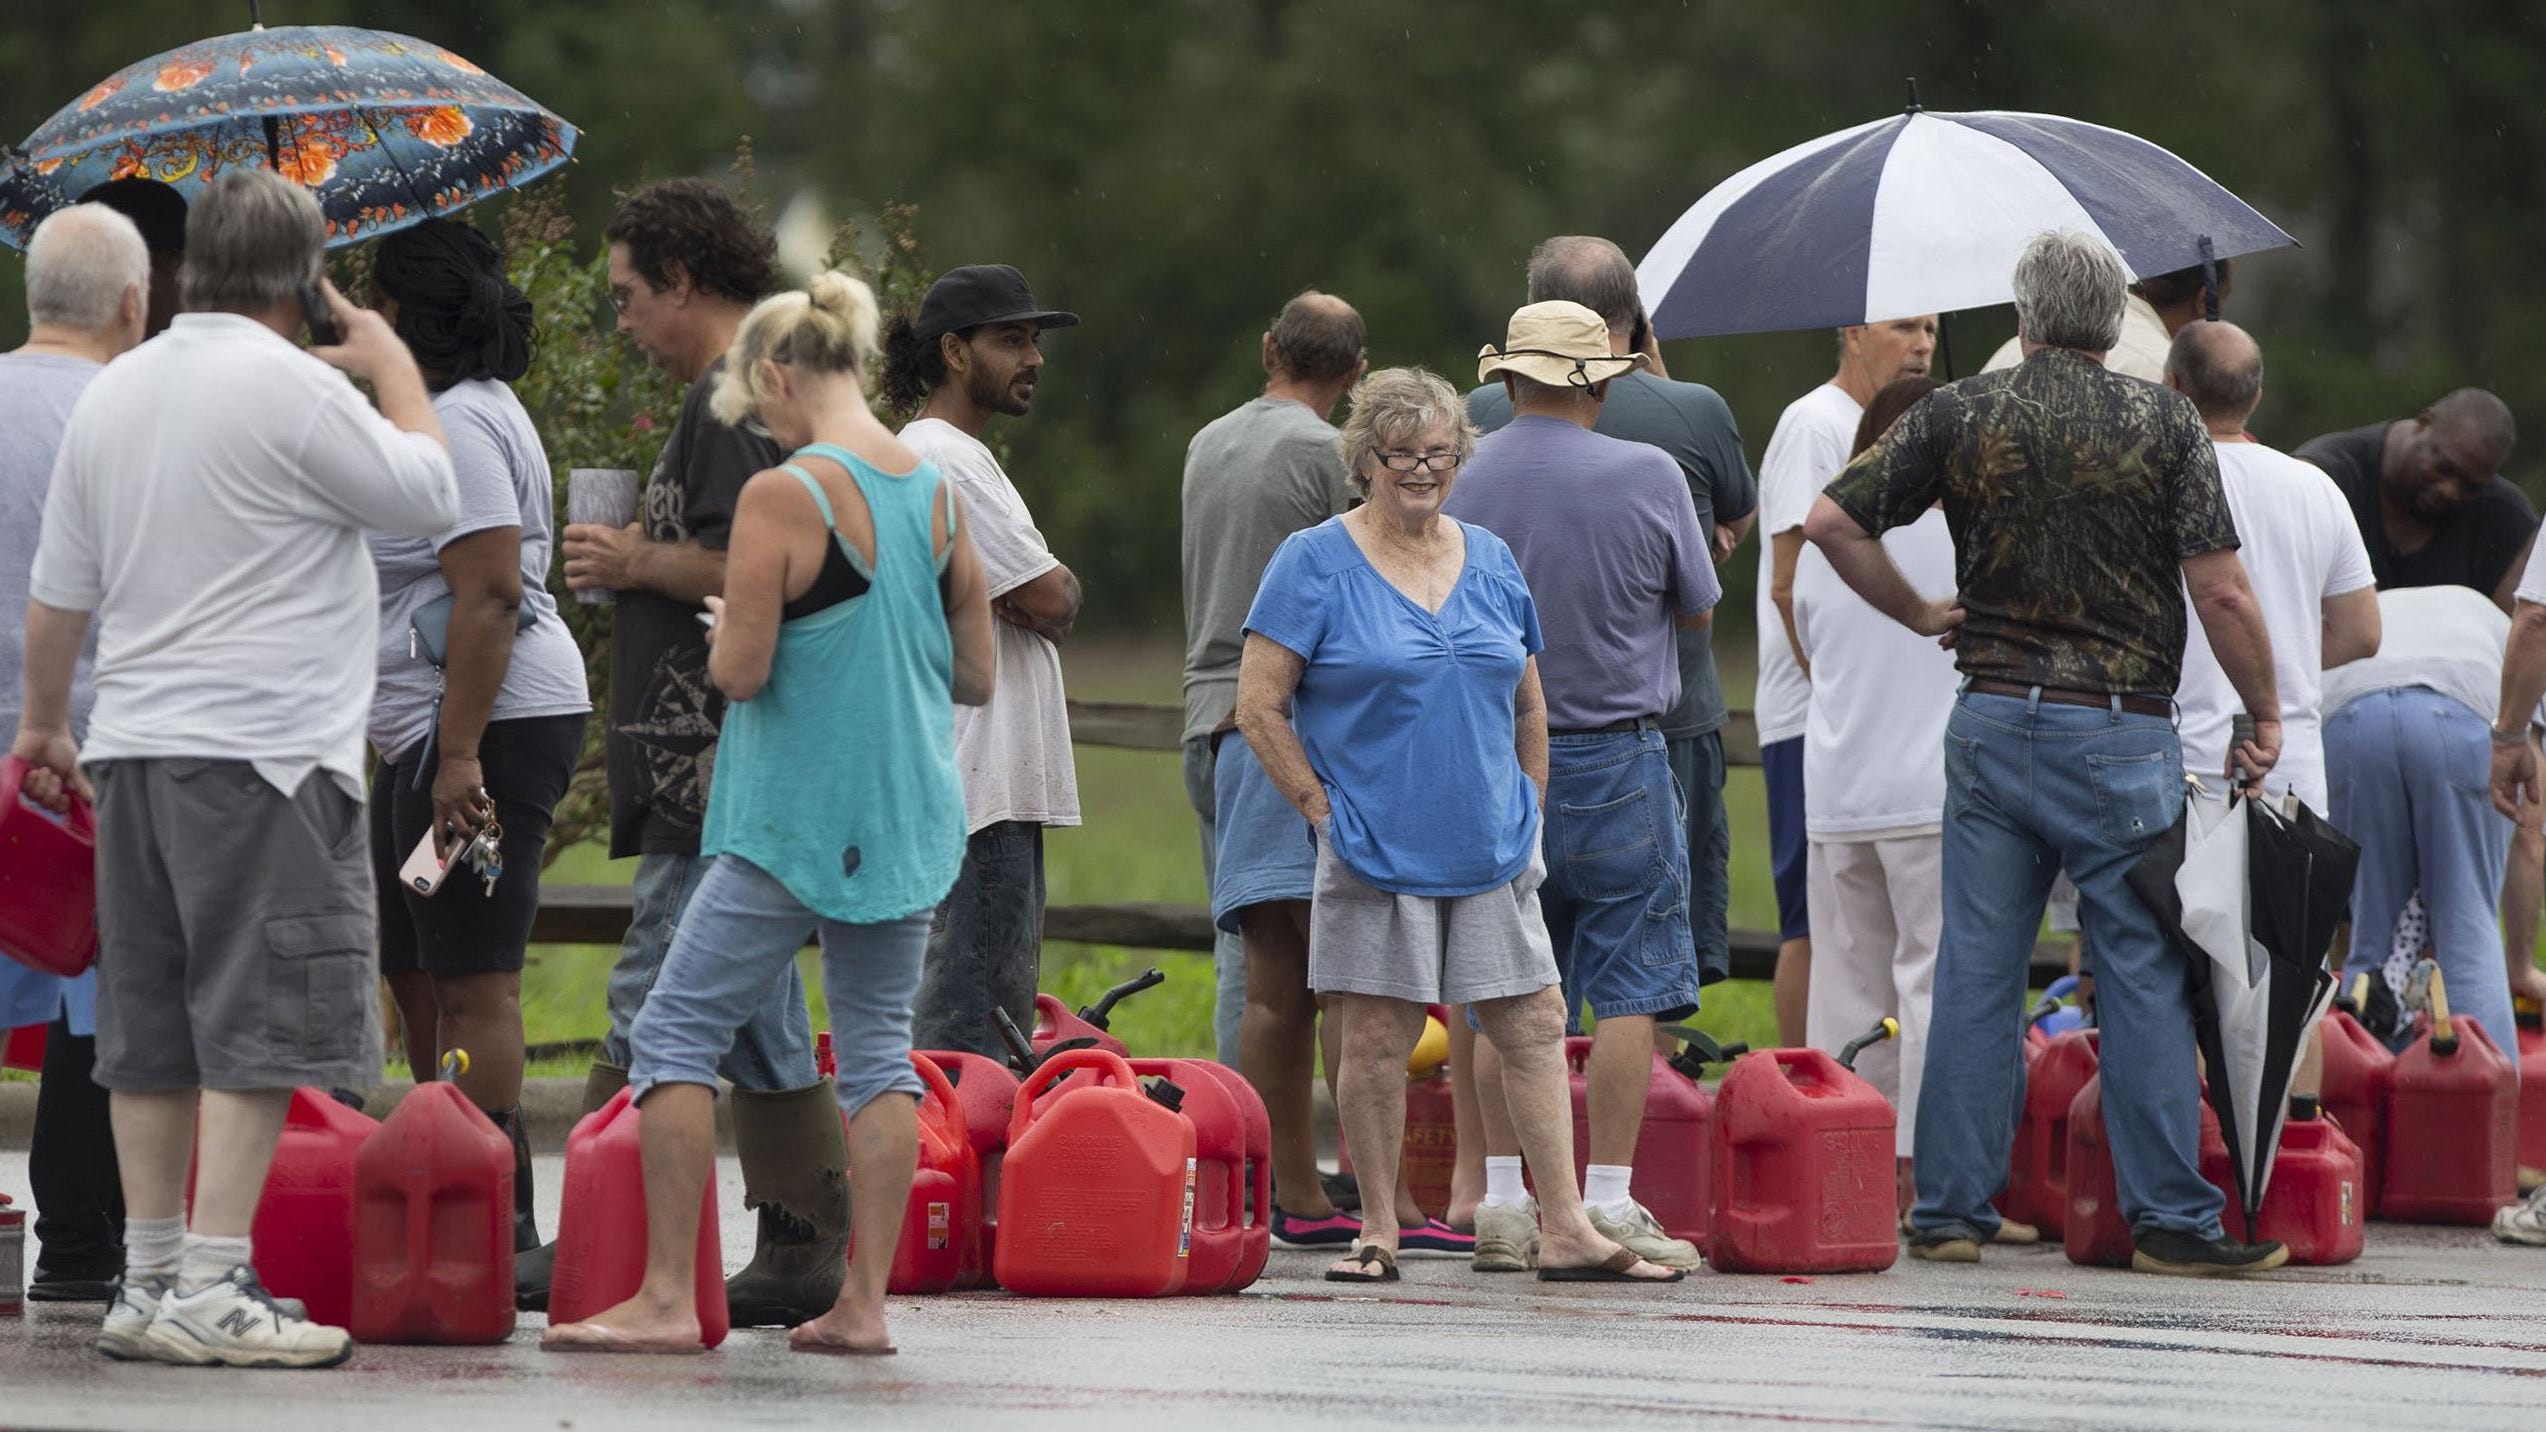 Alice Cooley and her husband, Calvin, of Bridgeton, N.C., wait in line for gasoline at the River Bend Fuel Mart on Saturday, Sept. 15, 2018, in River Bend, N.C. The Cooleys are without power and drove around Craven County looking for gasoline on Friday after Hurricane Florence caused widespread flooding and power outages. (Robert Willett/Raleigh News & Observer/TNS)